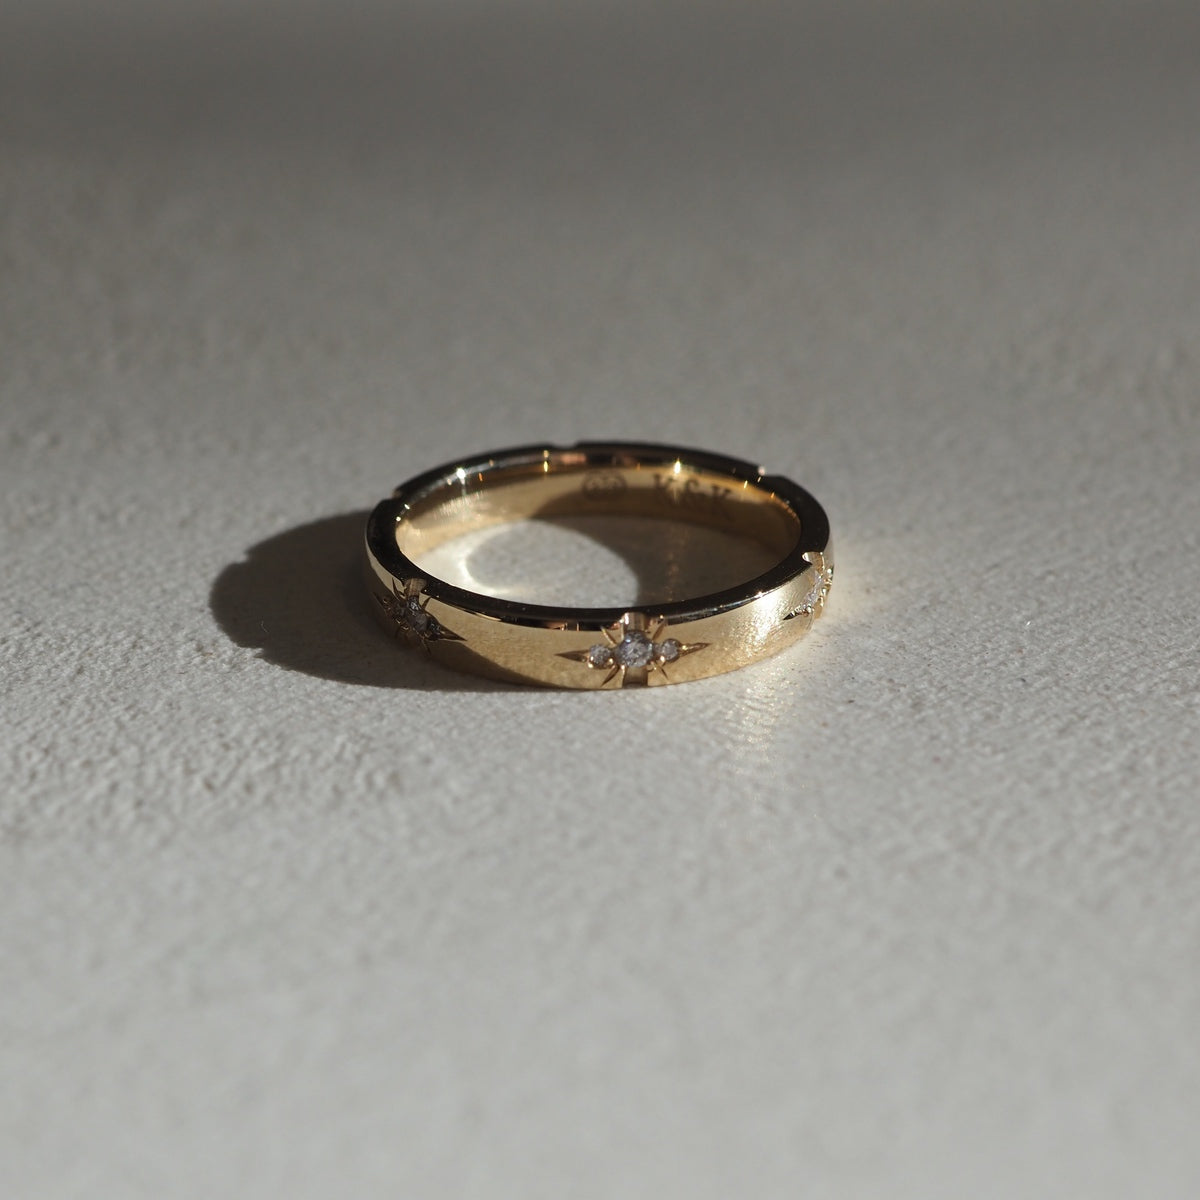 A solid 18ct yellow gold half-round band, set with six tiny trios of speciality set lab-grown diamonds. 3mm thick